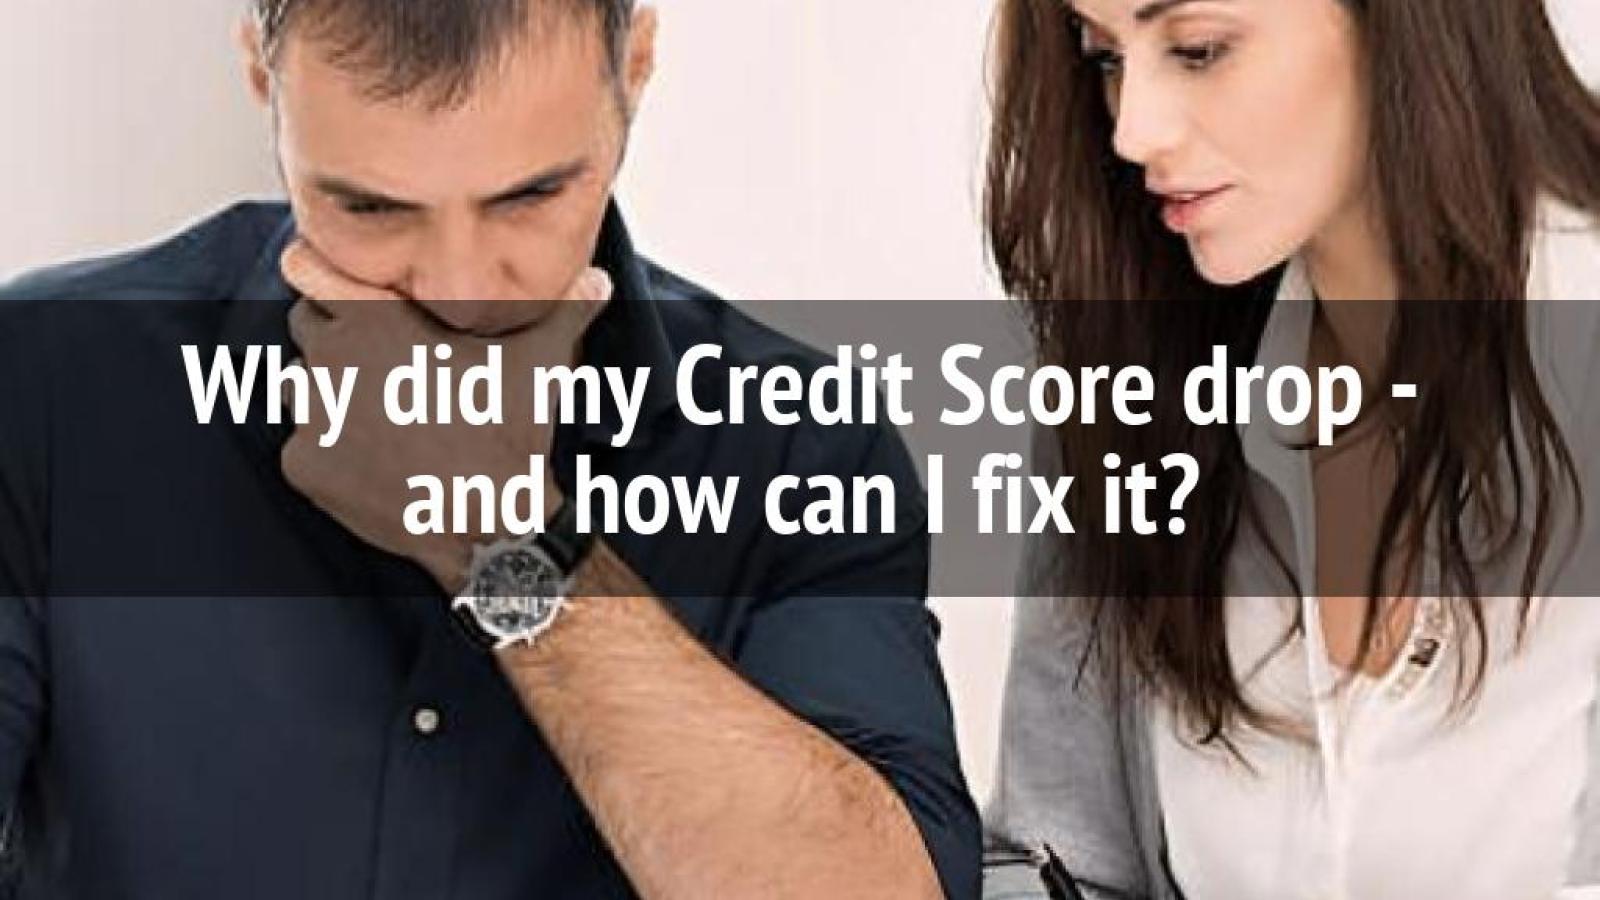 Why did my Credit Score drop and how can I fix it?